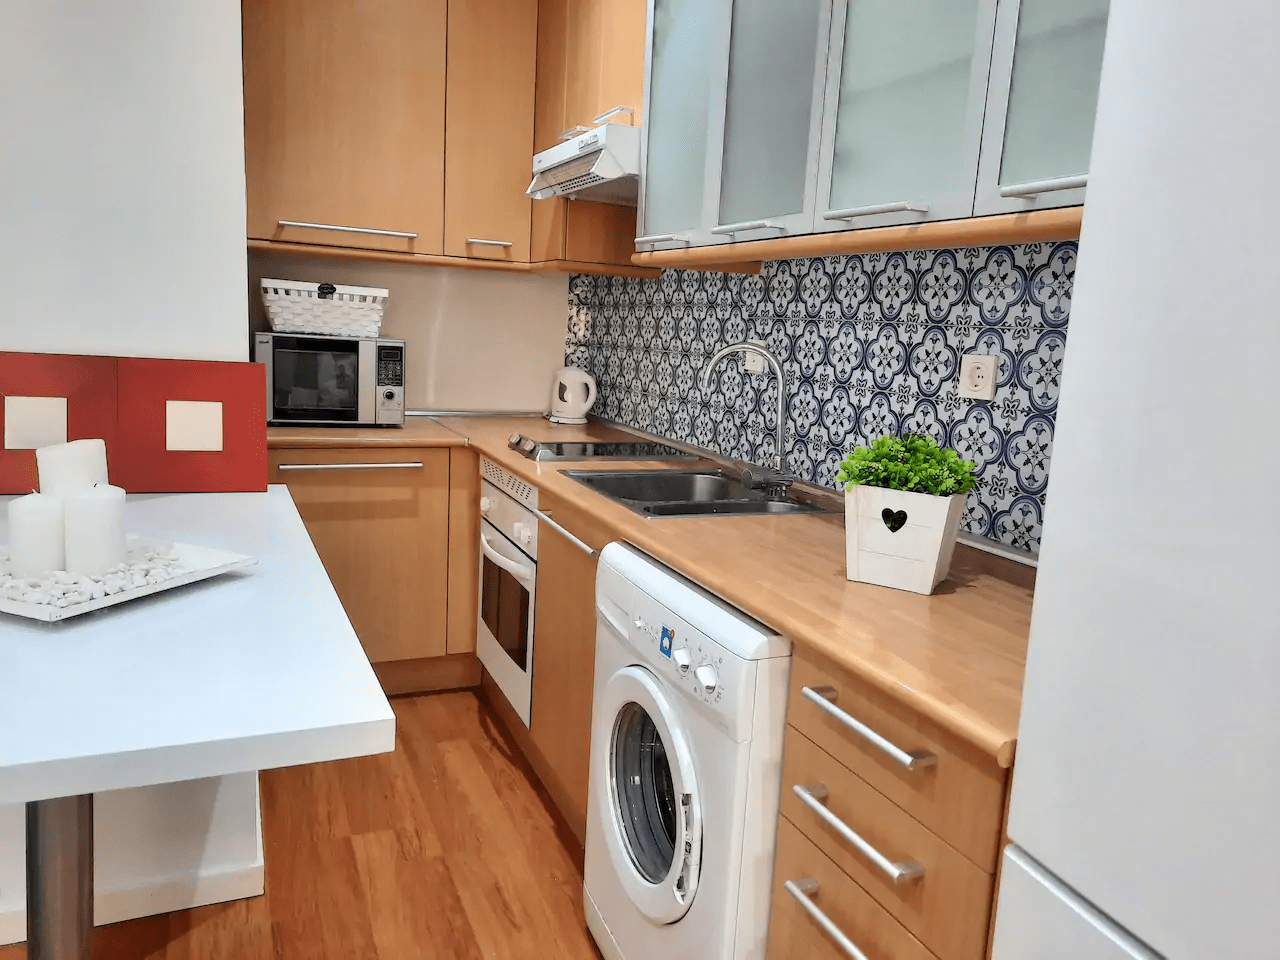 1 bedroom apartment around Madrid for expats